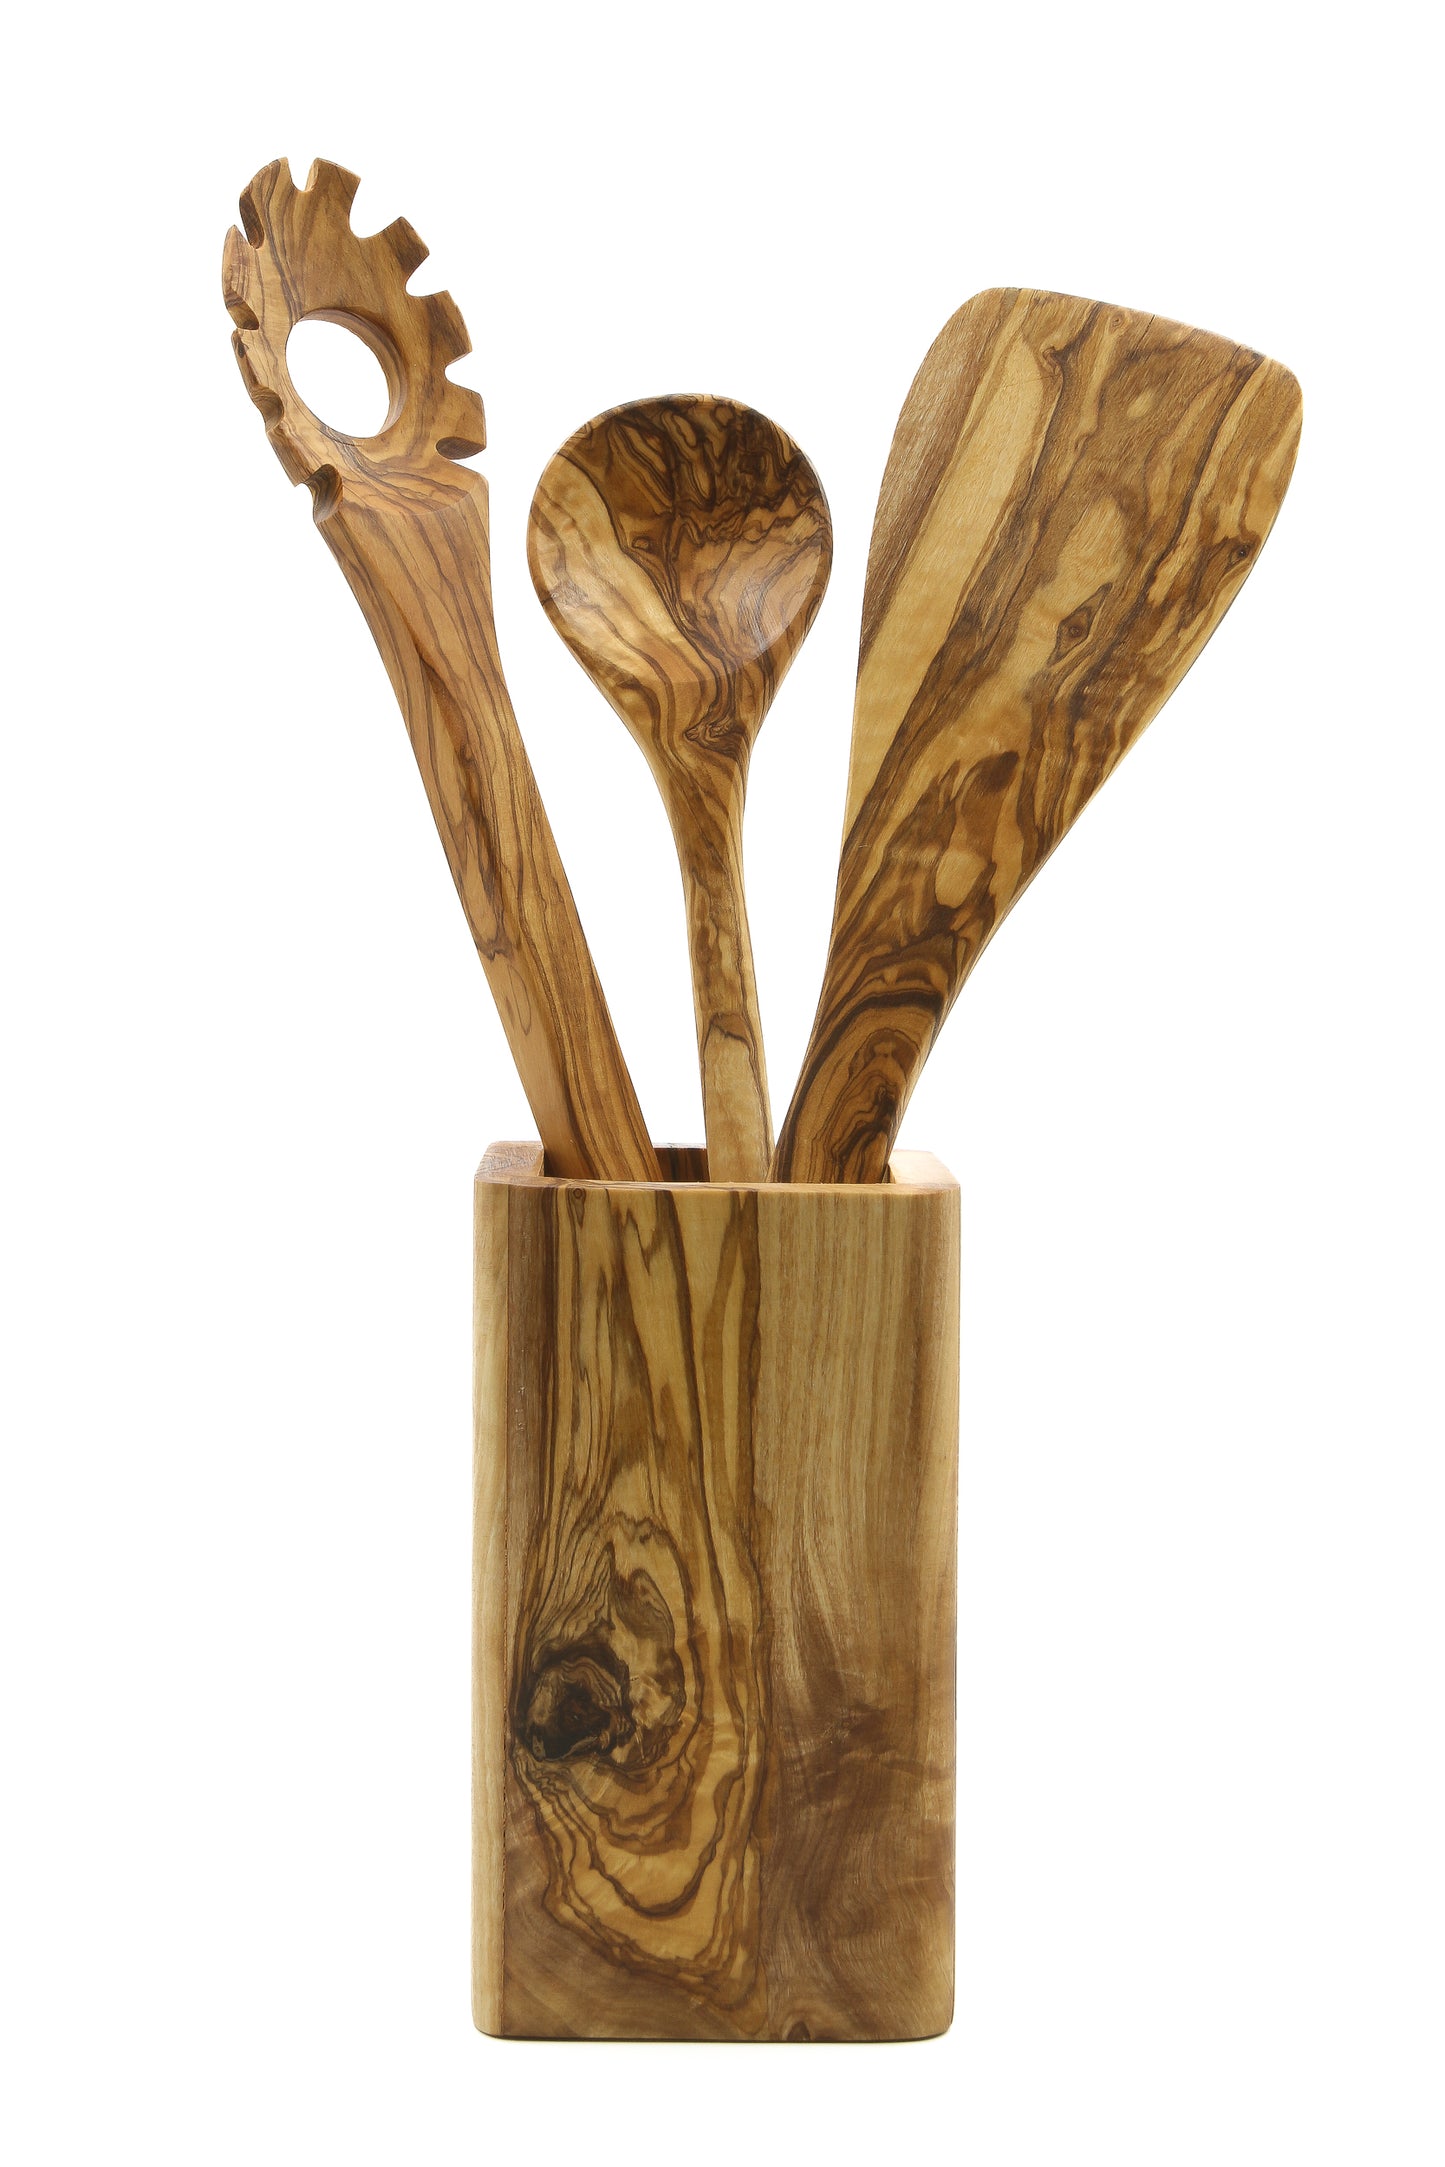 Olive wood kitchenware utensils set for a natural touch in your culinary space